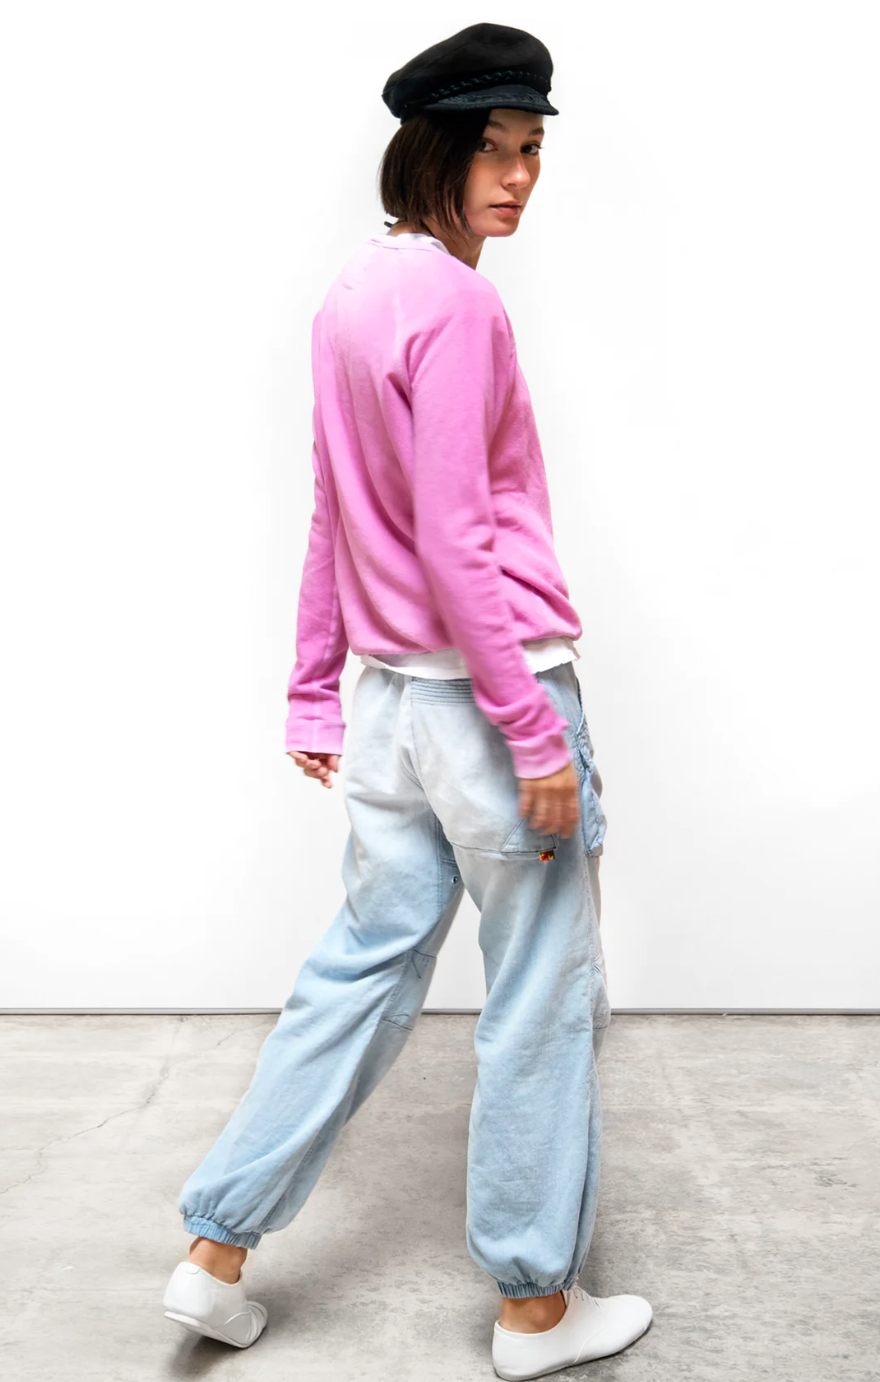 A woman models casual fashion, looking over her shoulder. She wears a pink sweatshirt, FLAP/SNAP INDIGO pants from Free City (sparrow, LLC), white sneakers, and a black beret.